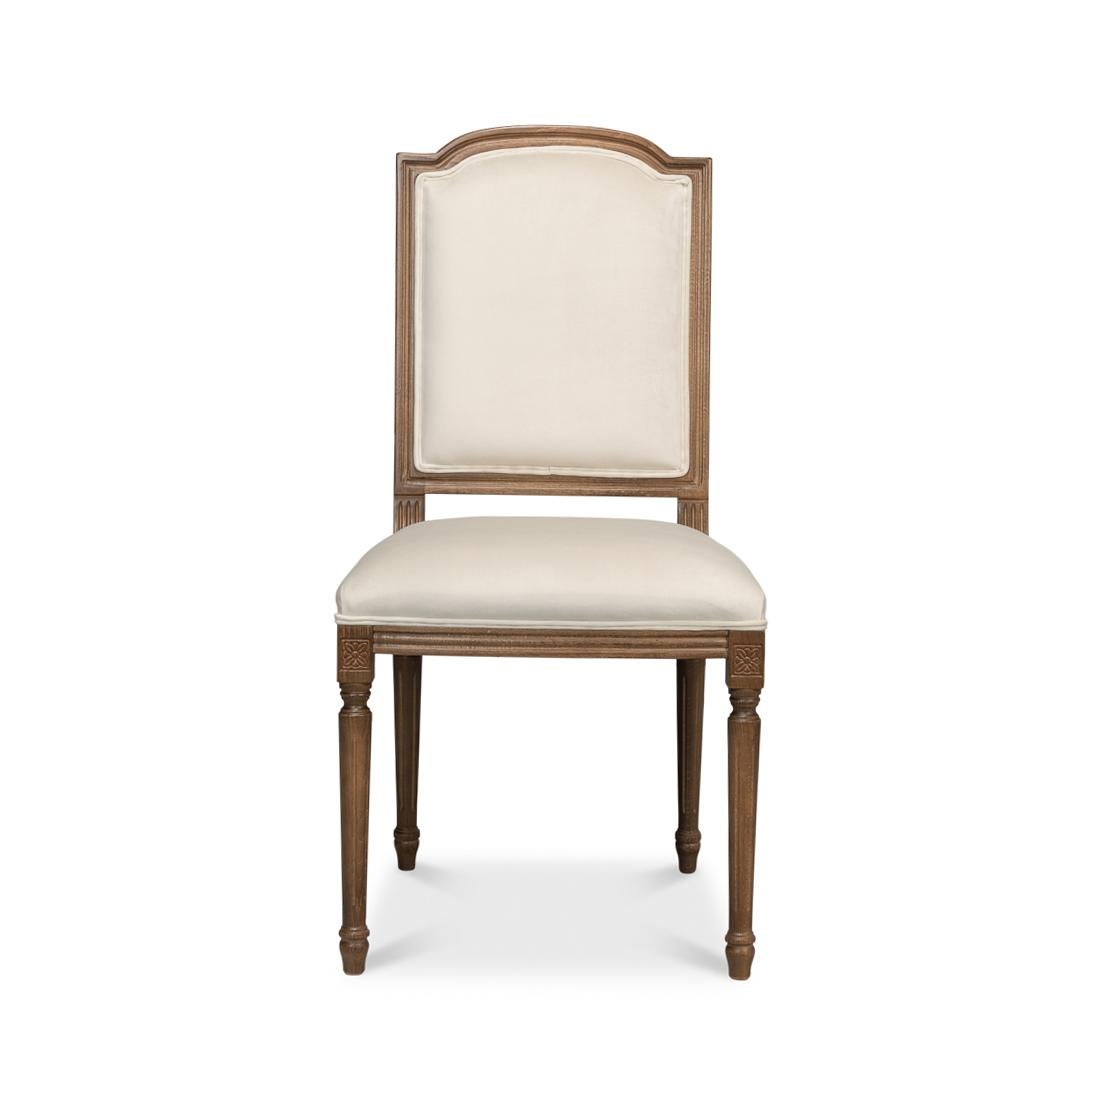 This fine chair is a true nod to the classic French Provincial design, crafted with detailed attention to bring an air of elegance to your dining room. The graceful wooden frame boasts a rich, warm finish, complementing the cream-colored upholstery